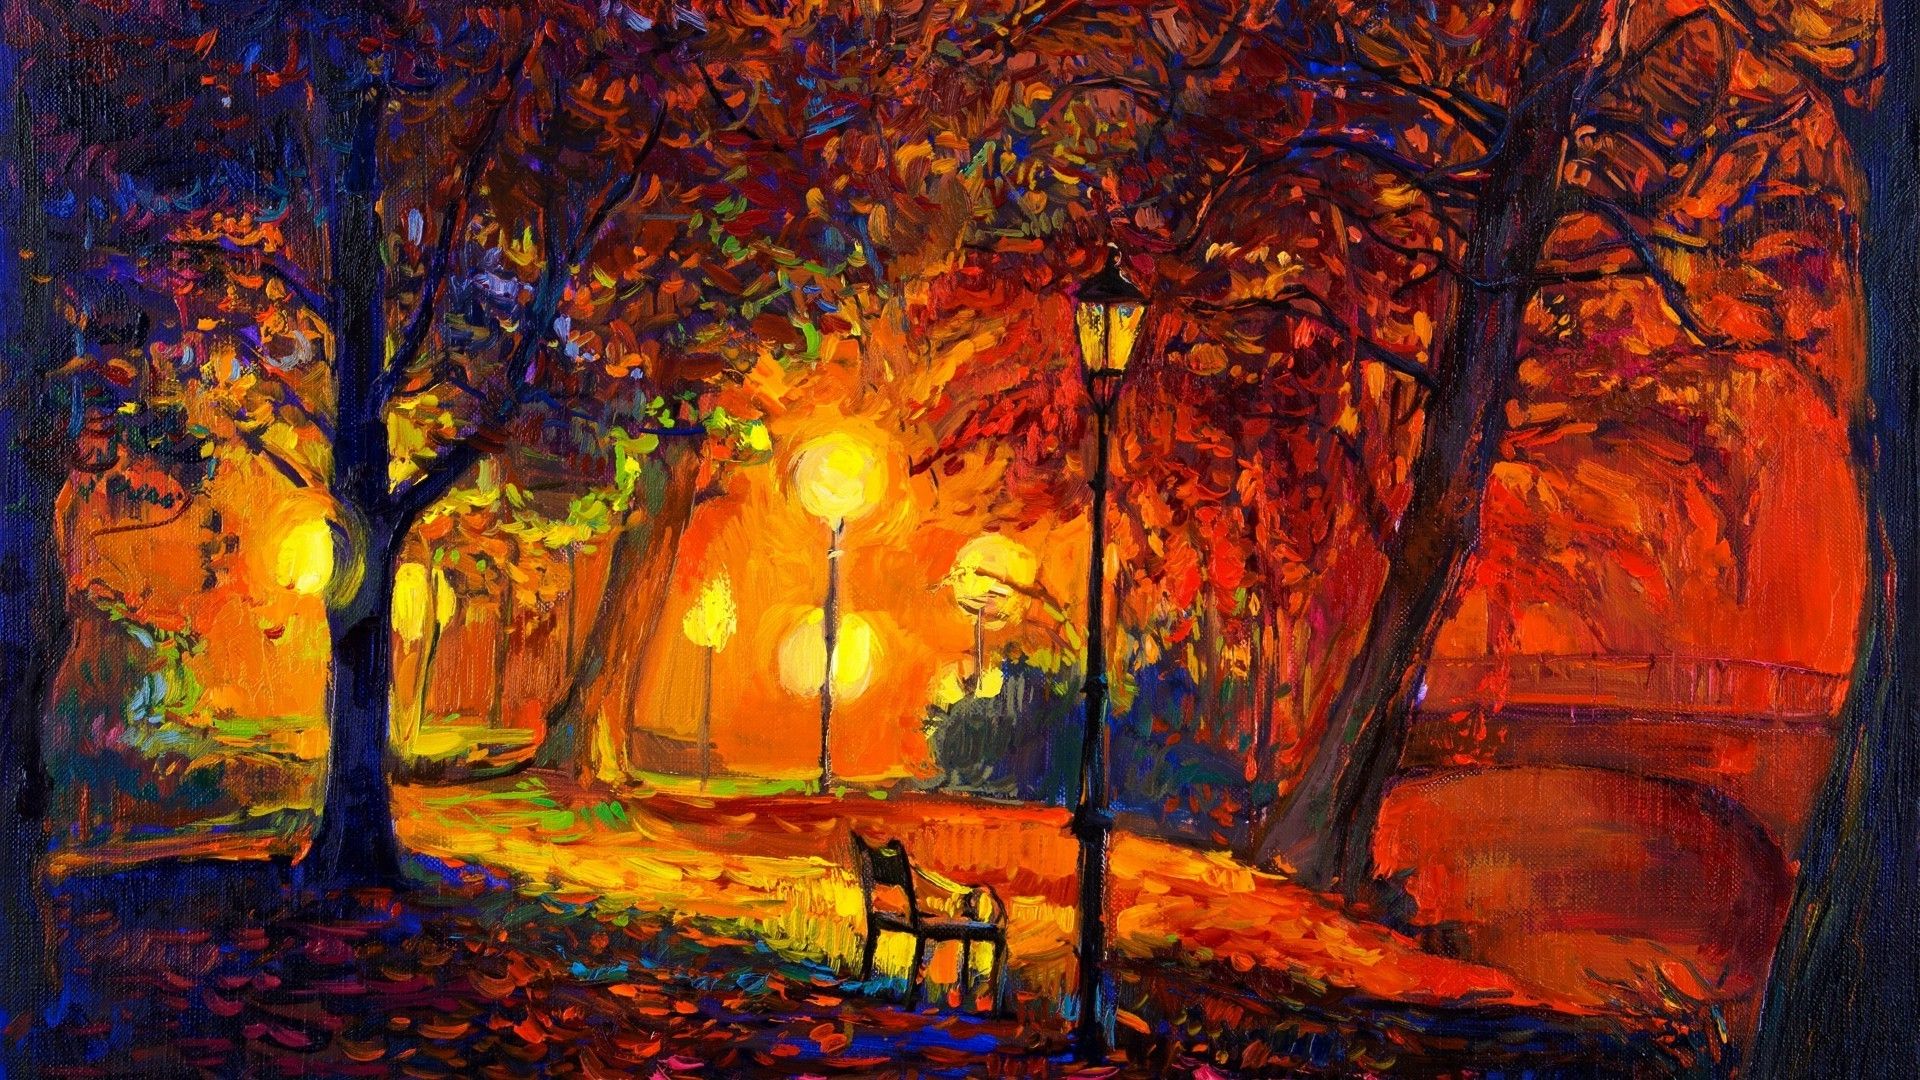 digital Art, Nature, Trees, Painting, Park, Bench, Lamps, Fall, Leaves, Modern Impressionism, Artwork Wallpaper HD / Desktop and Mobile Background